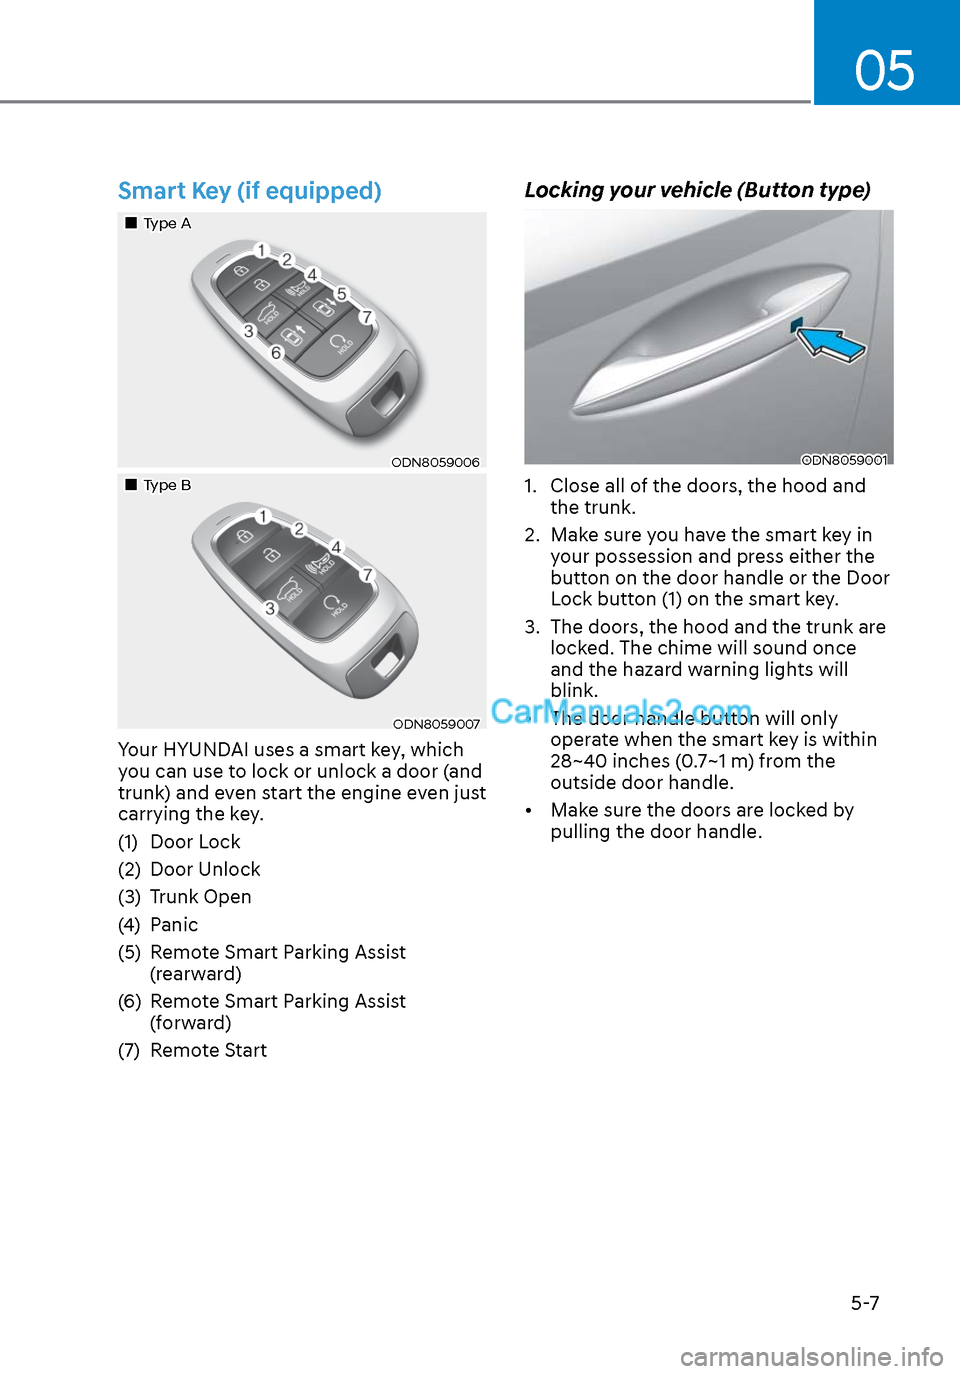 Hyundai Sonata 2020  Owners Manual 05
5-7
Smart Key (if equipped)
Type AType A
ODN8059006ODN8059006
Type BType B
ODN8059007ODN8059007
Your HYUNDAI uses a smart key, which 
you can use to lock or unlock a door (a